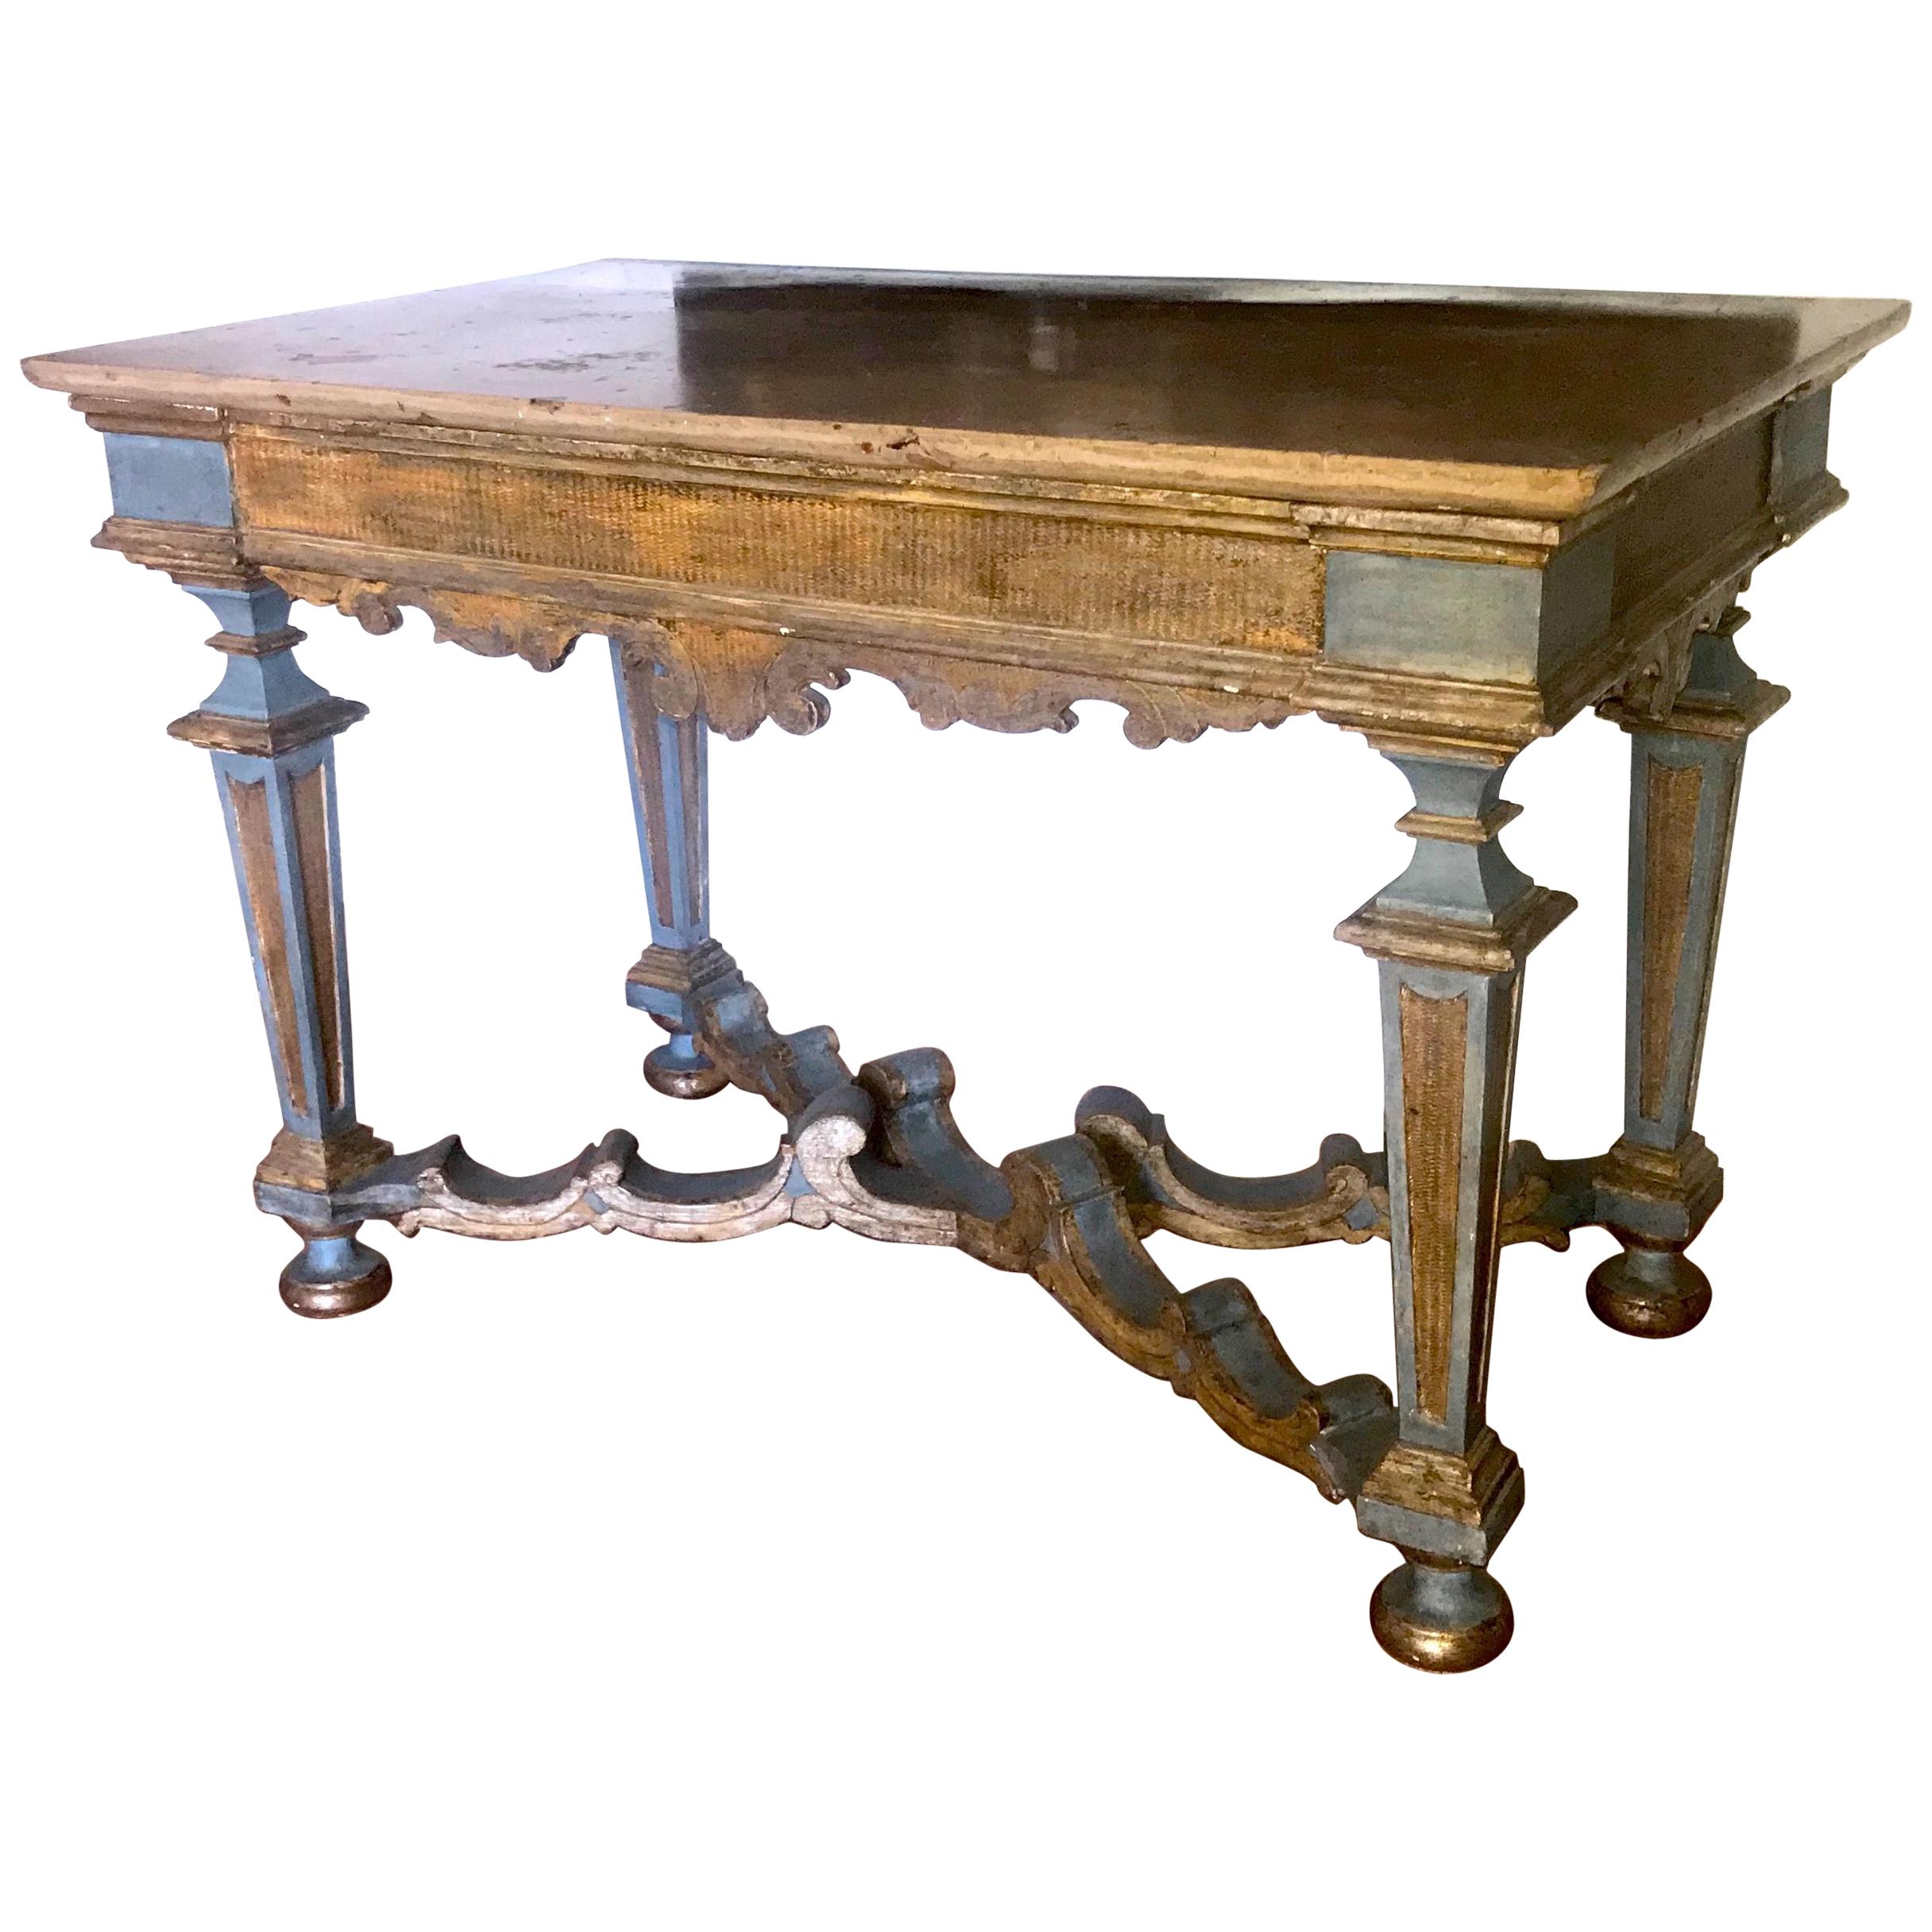 Elegant Italian 17th century light blue painted and parcel-gilt console tables with a marble top.
Provenience from a Tuscany aristocratic estate.
Rustic elegance decor.
  